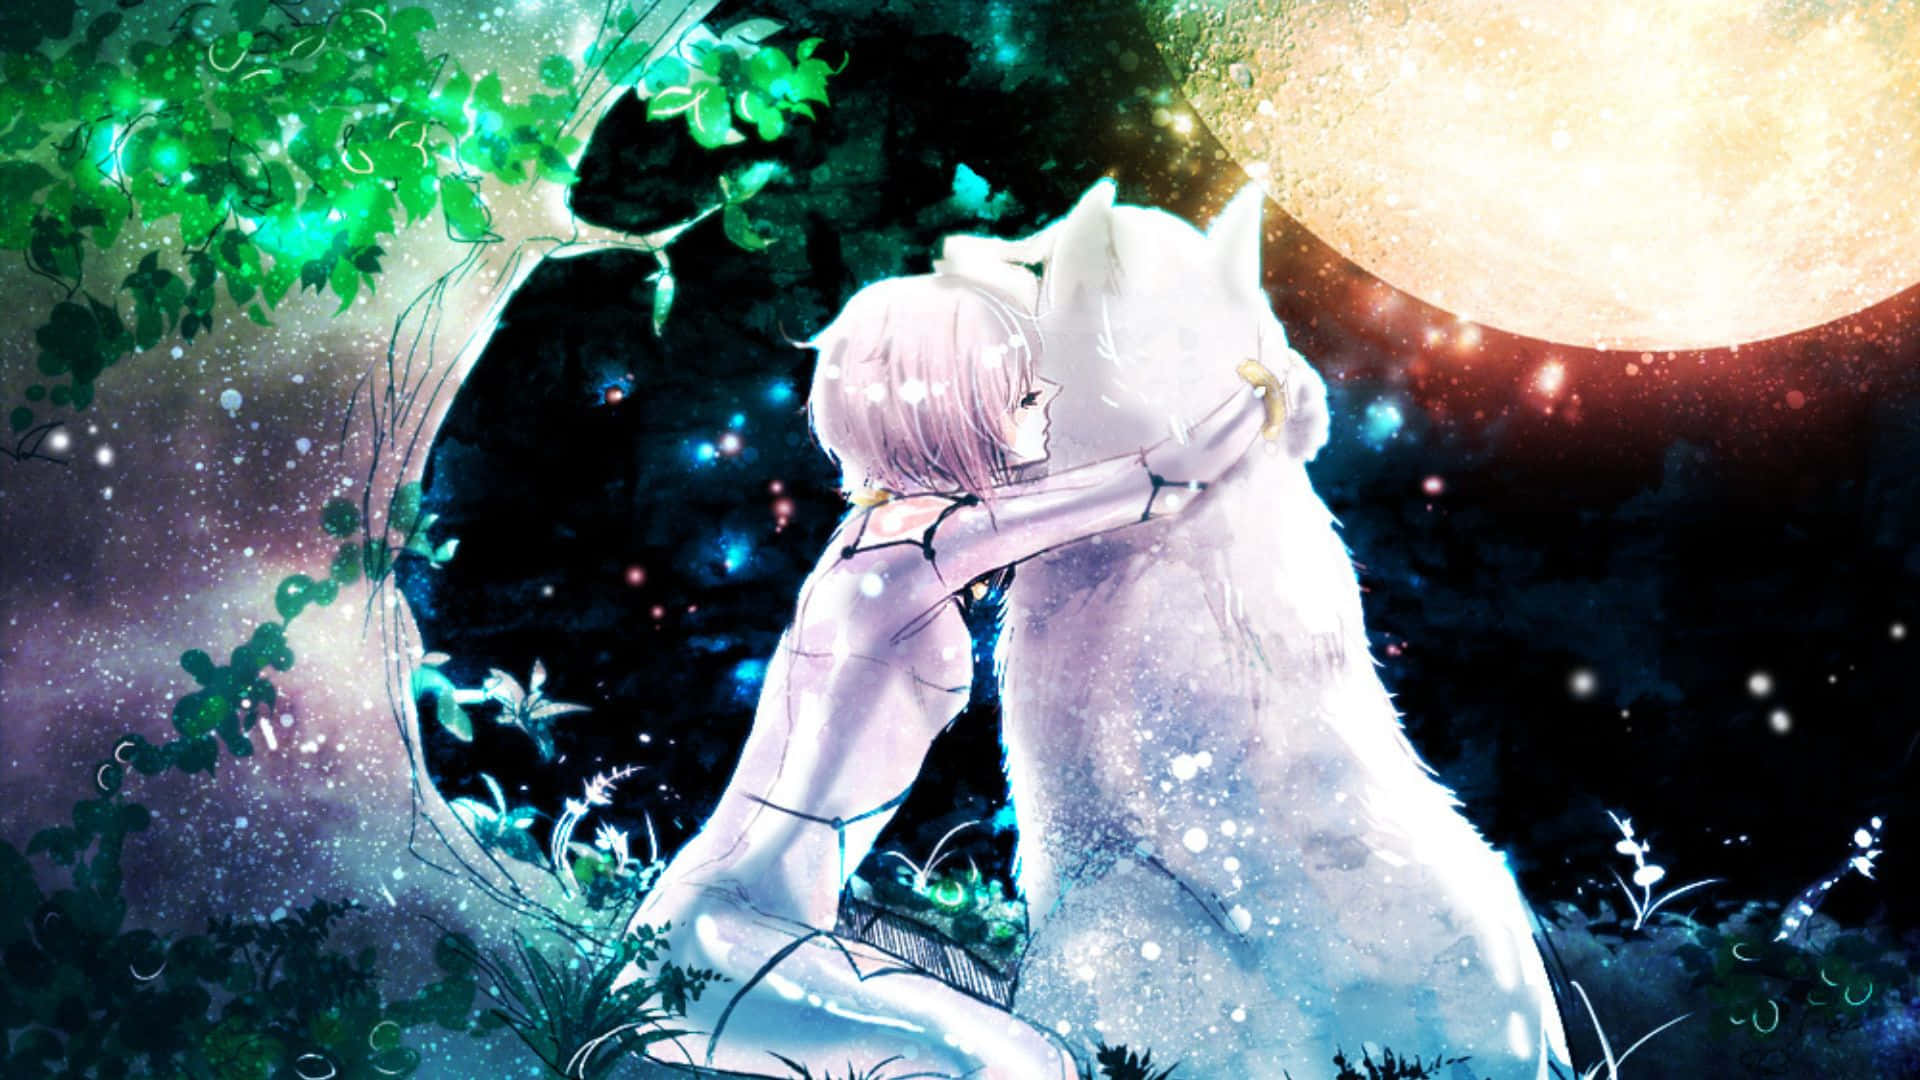 Cheza and Kiba, the main characters of the Wolf's Rain anime, embracing each other under the moonlight Wallpaper